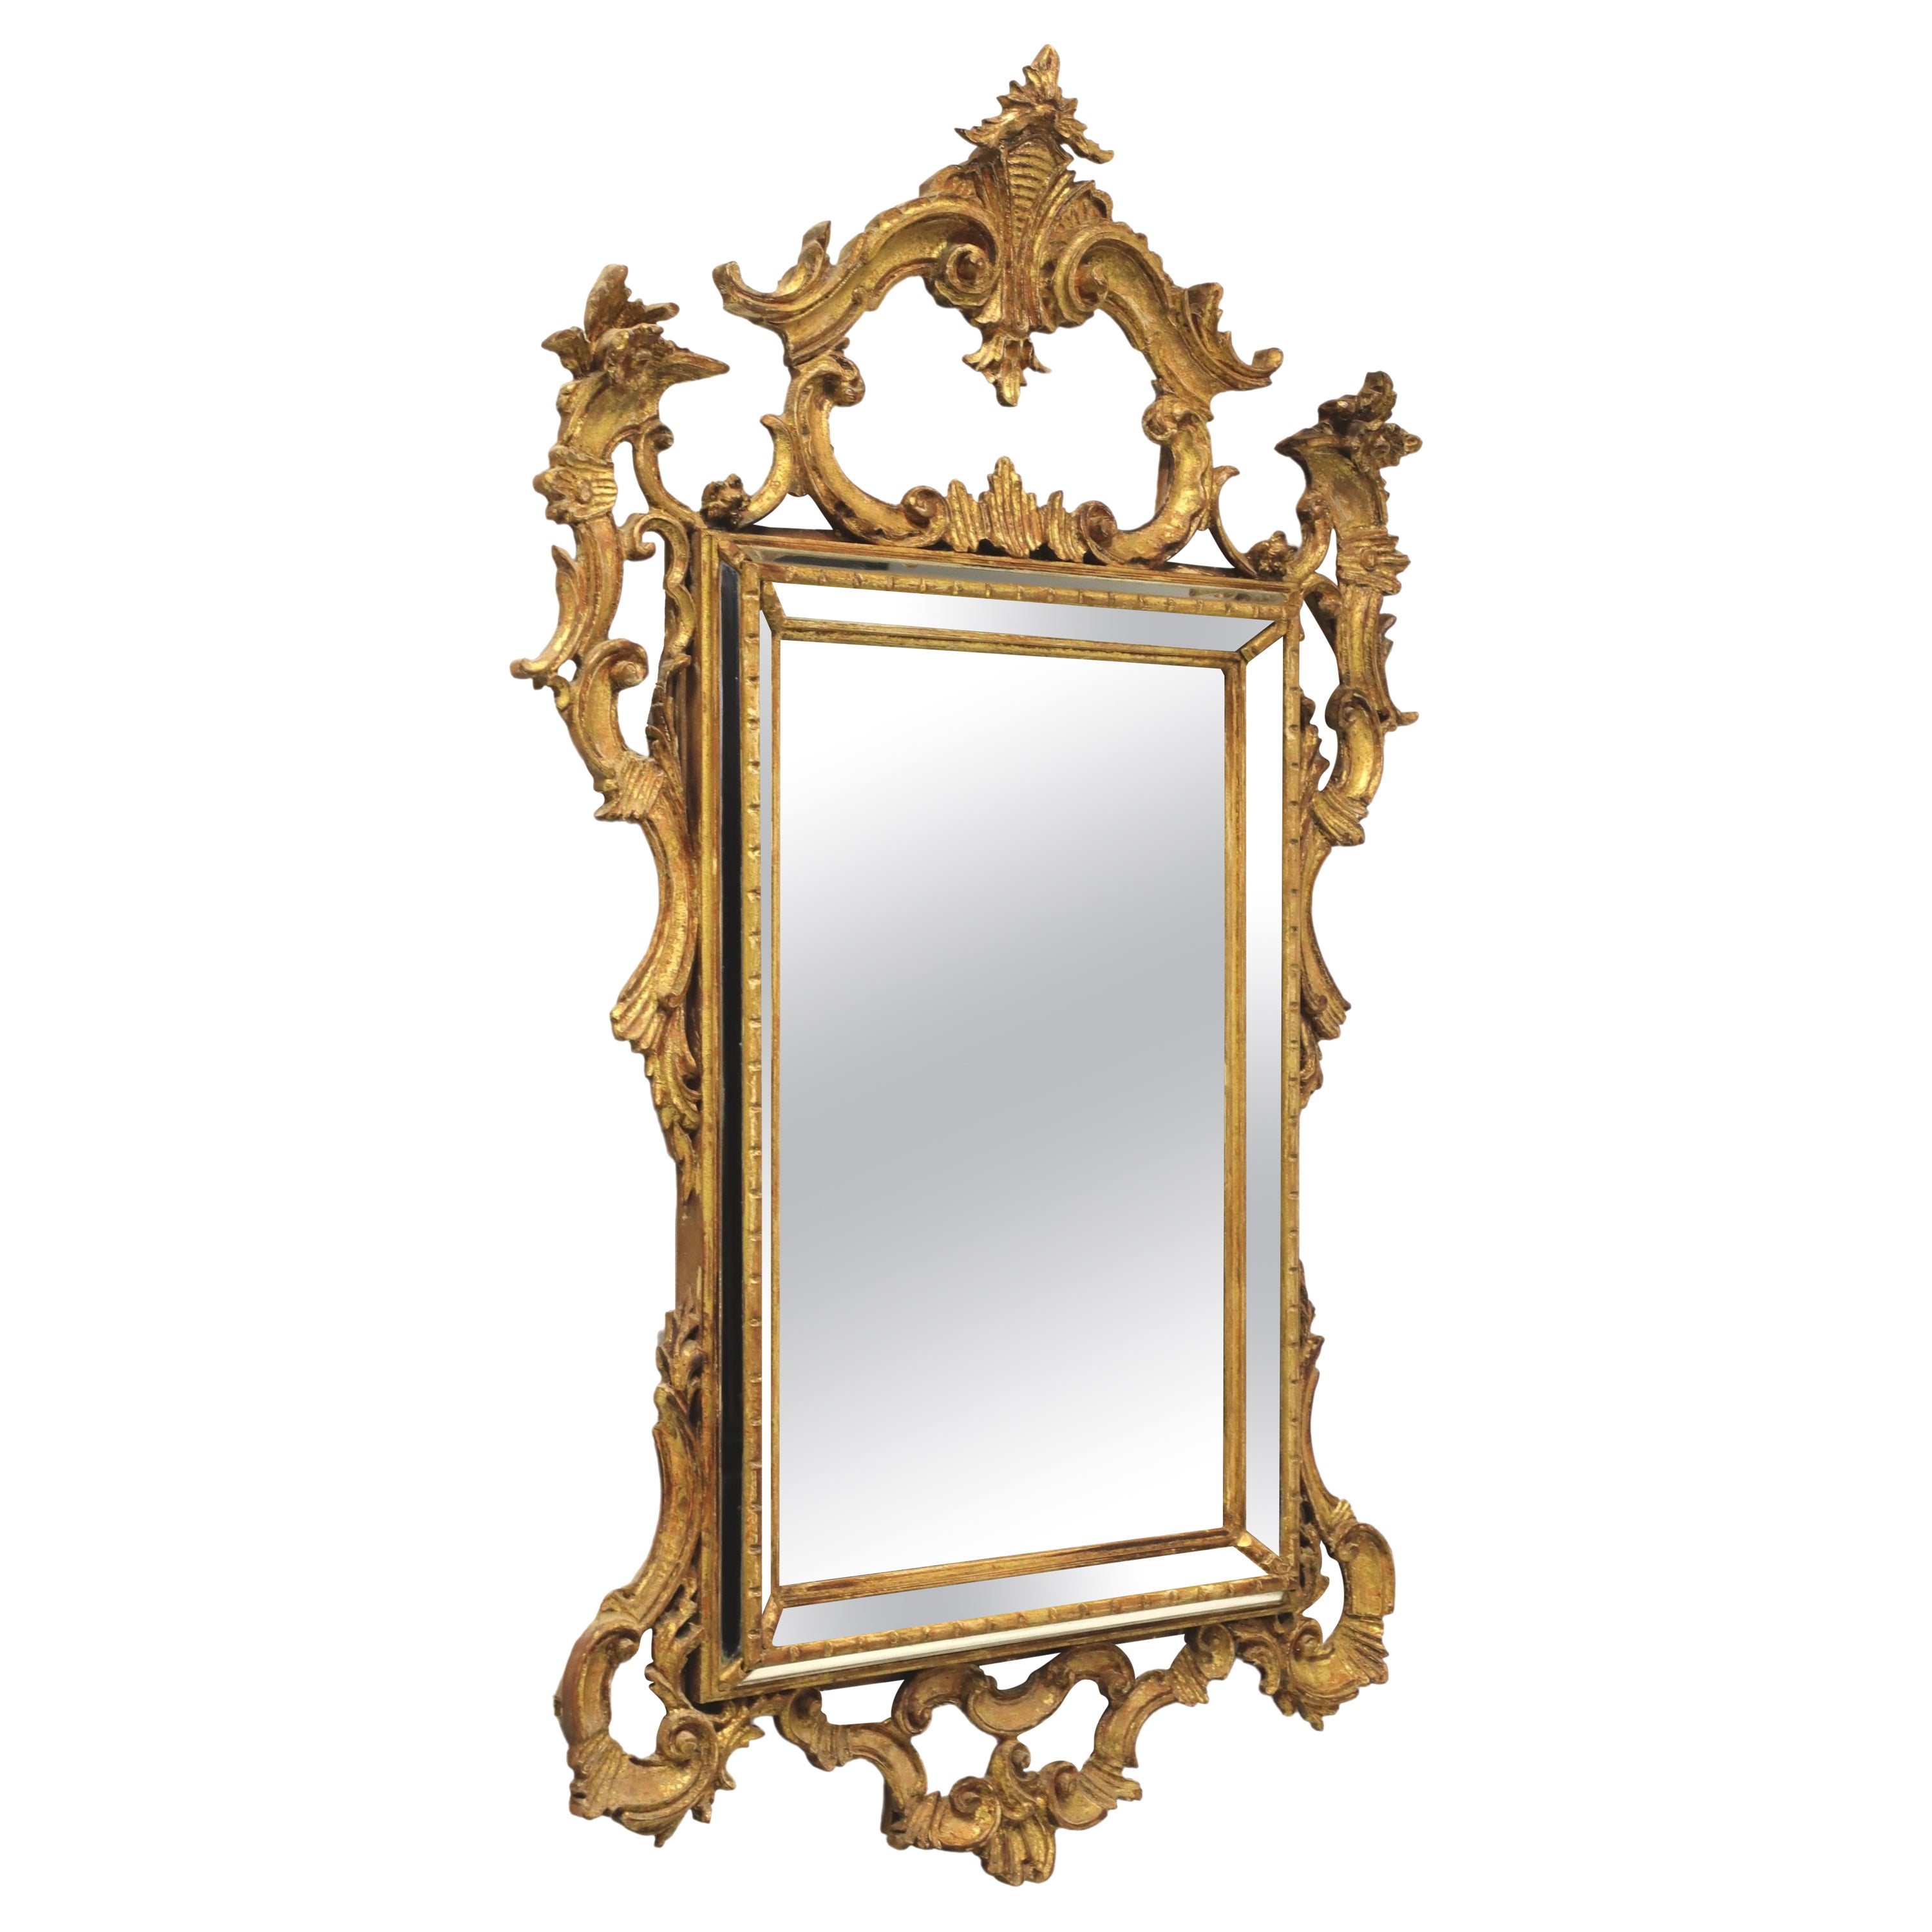 LABARGE 1960's Gold Carved French Louis XV Rococo Parclose Wall Mirror - B